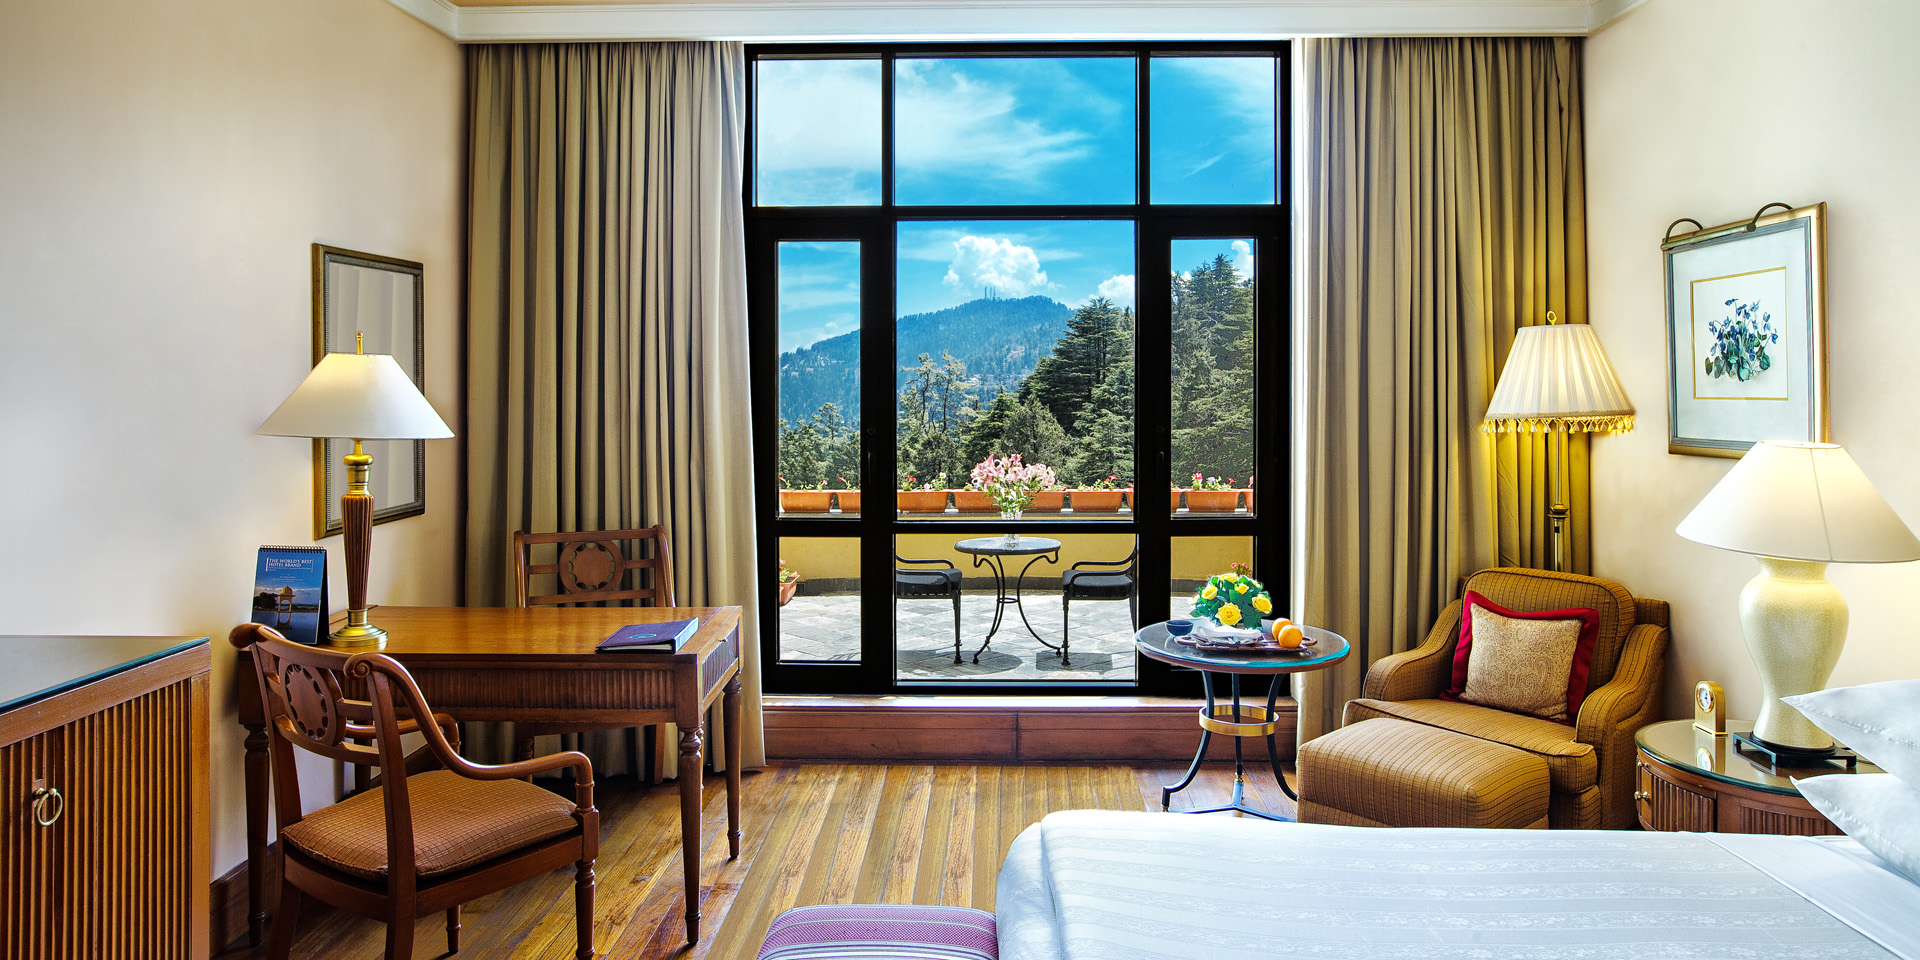 Spend Your Holidays in the Lap of Nature by Staying at “Wildflower Hall